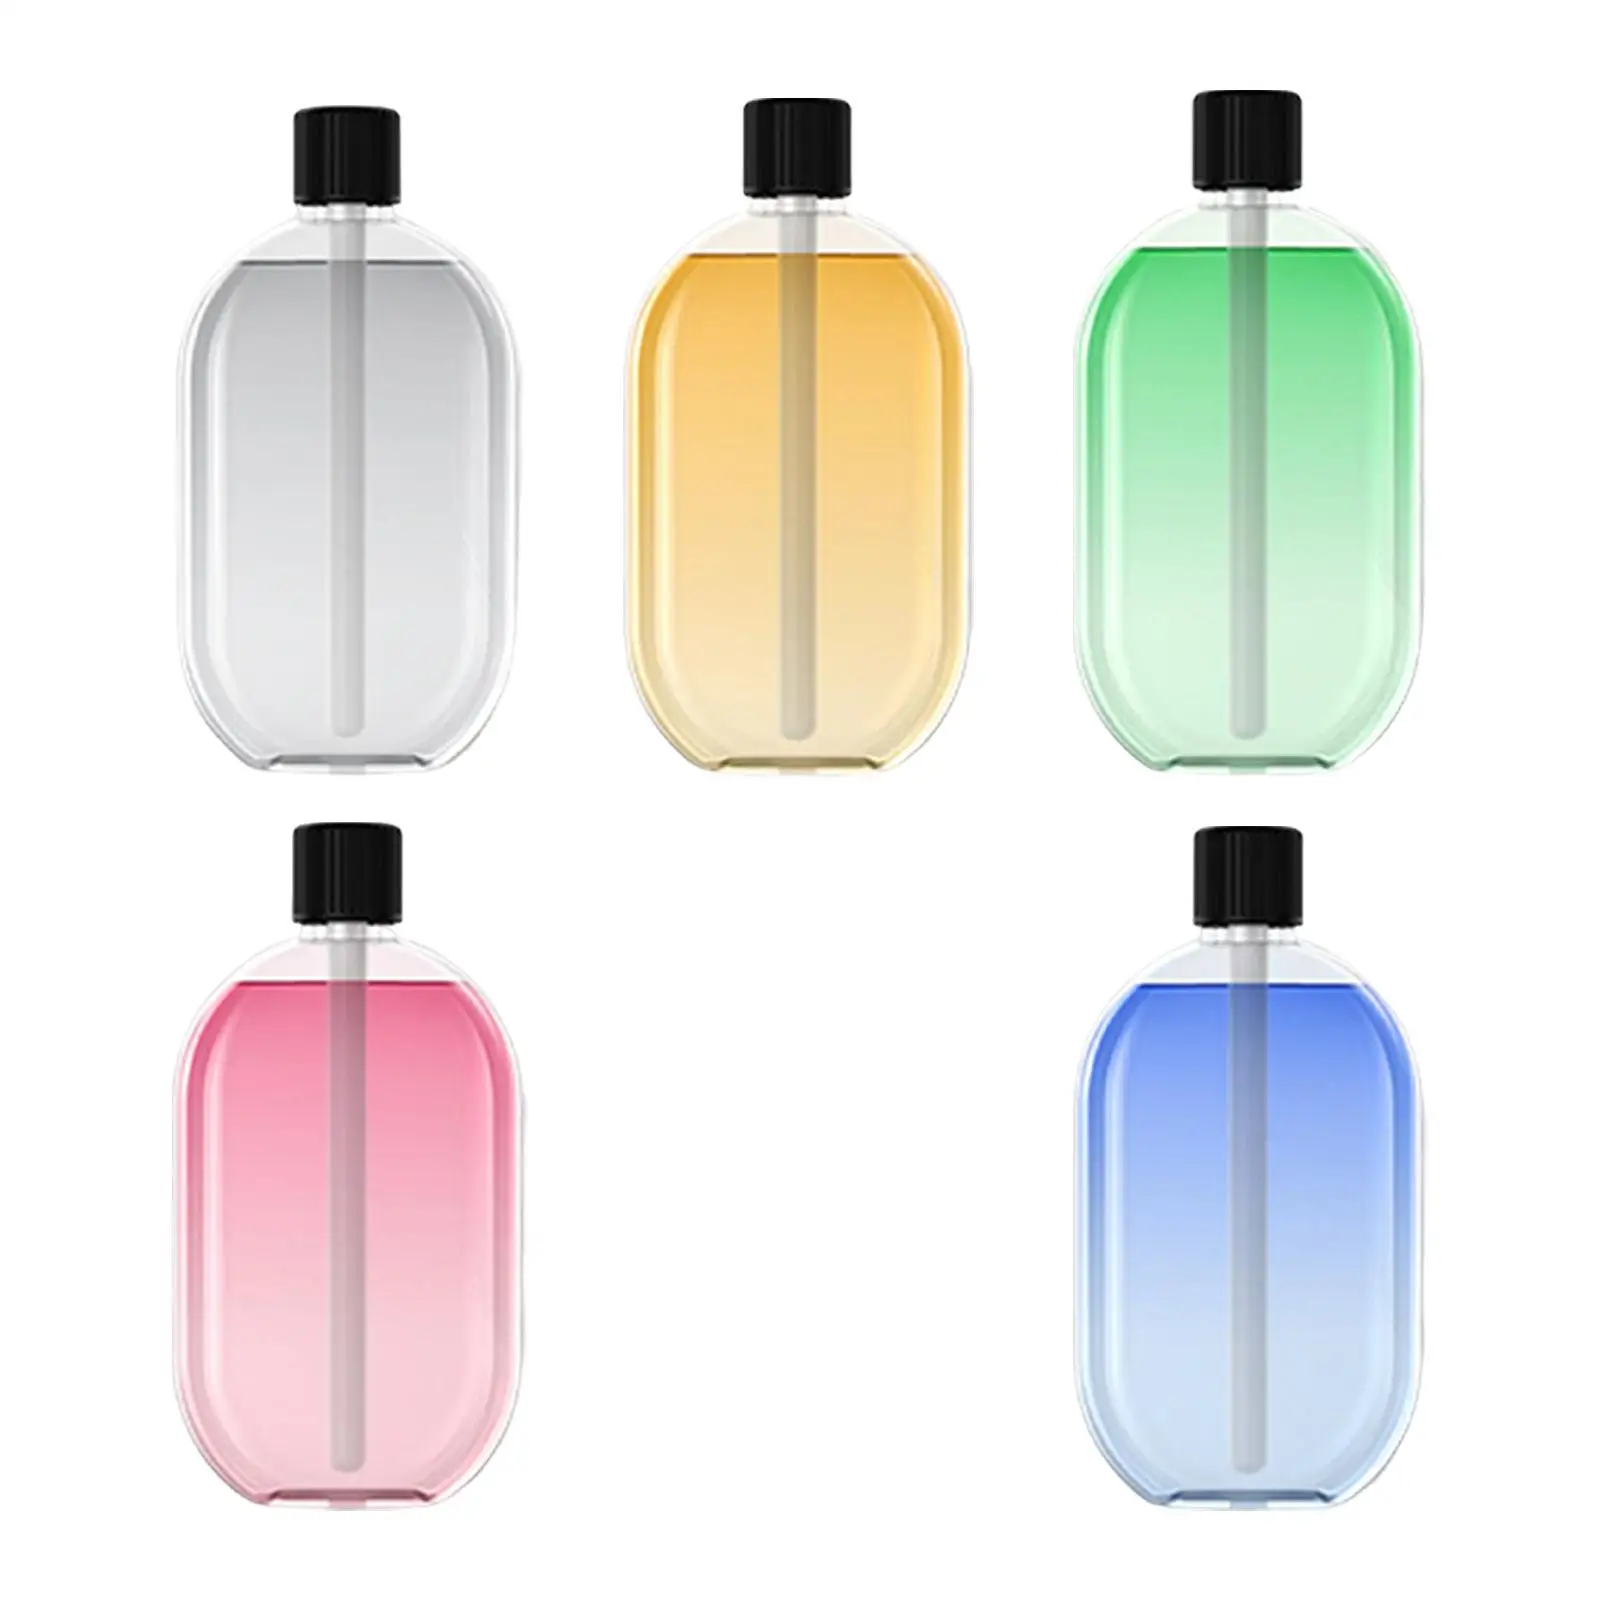 

Diffuser Essential Oils 50ml Aroma Relaxing Men Women Scented Oils for Large Room Humidifiers Household Bedroom Aroma Sprayer